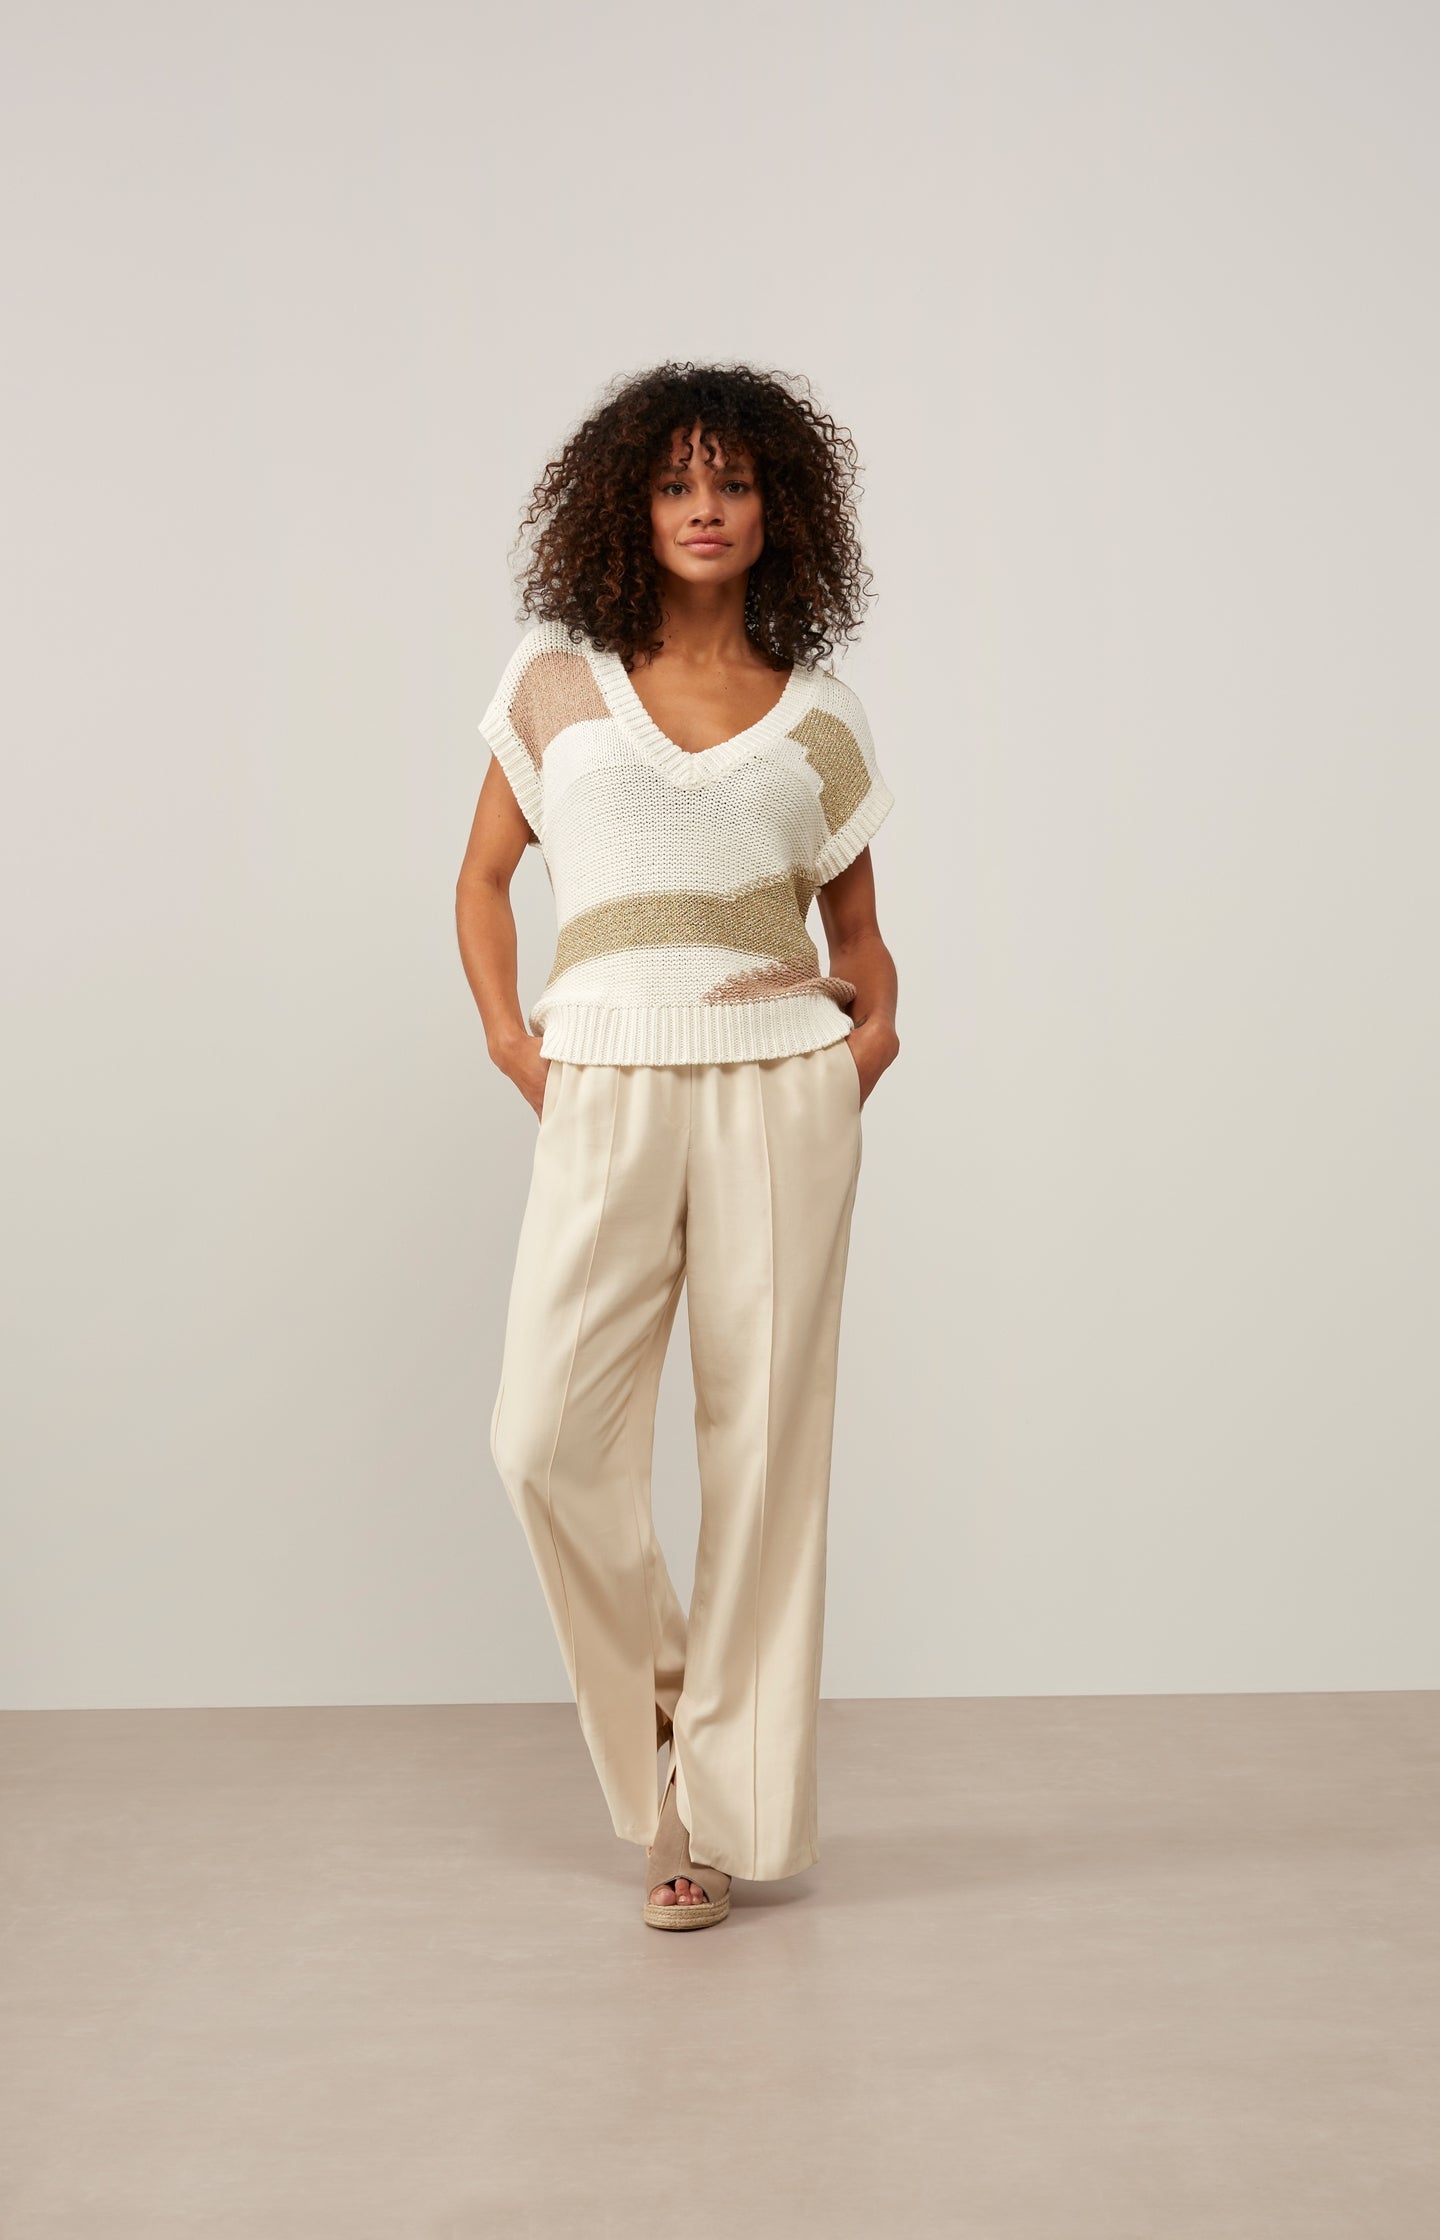 Wide leg trousers, side pockets, pintucks and a slit - Type: lookbook